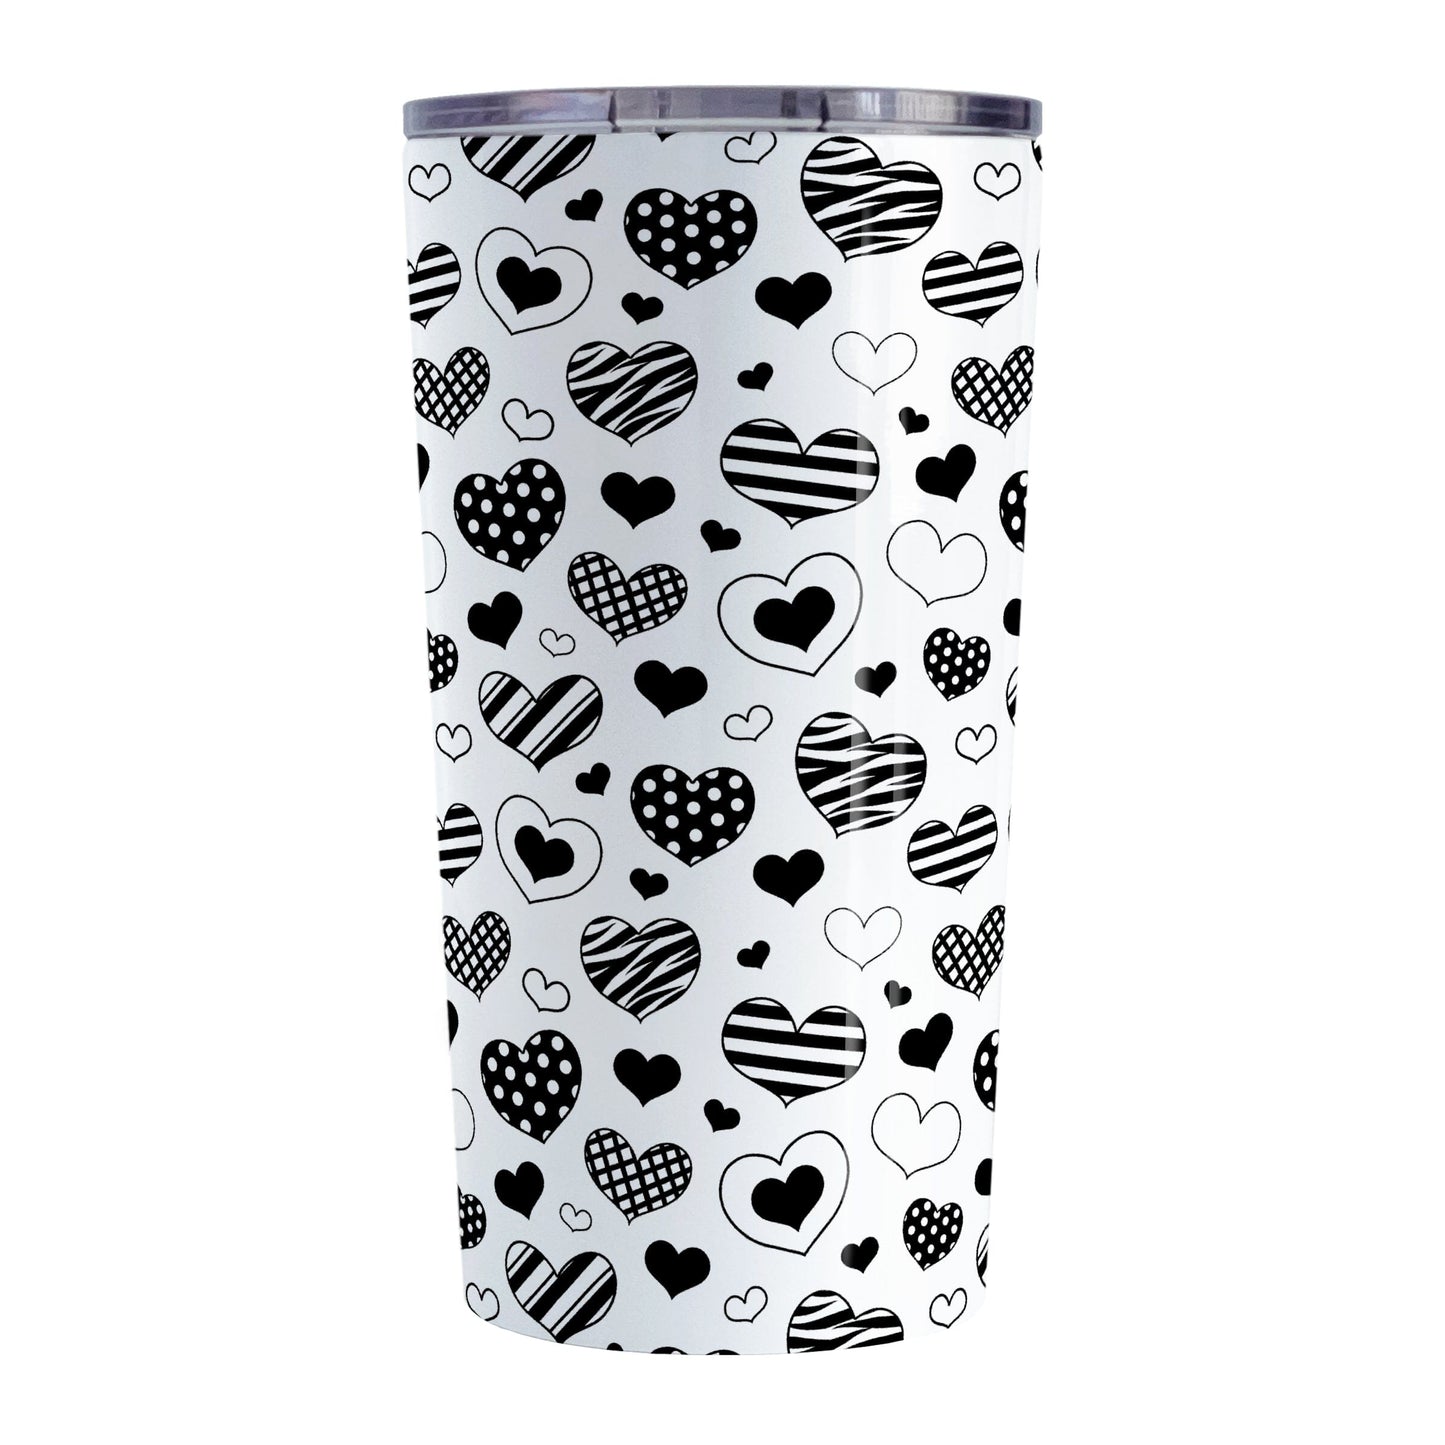 Black Heart Doodles Tumbler Cup (20oz) at Amy's Coffee Mugs. A stainless steel tumbler cup designed with hand-drawn black heart doodles in a pattern that wraps around the cup. This cute heart pattern is perfect for Valentine's Day or for anyone who loves hearts and young-at-heart drawings. 